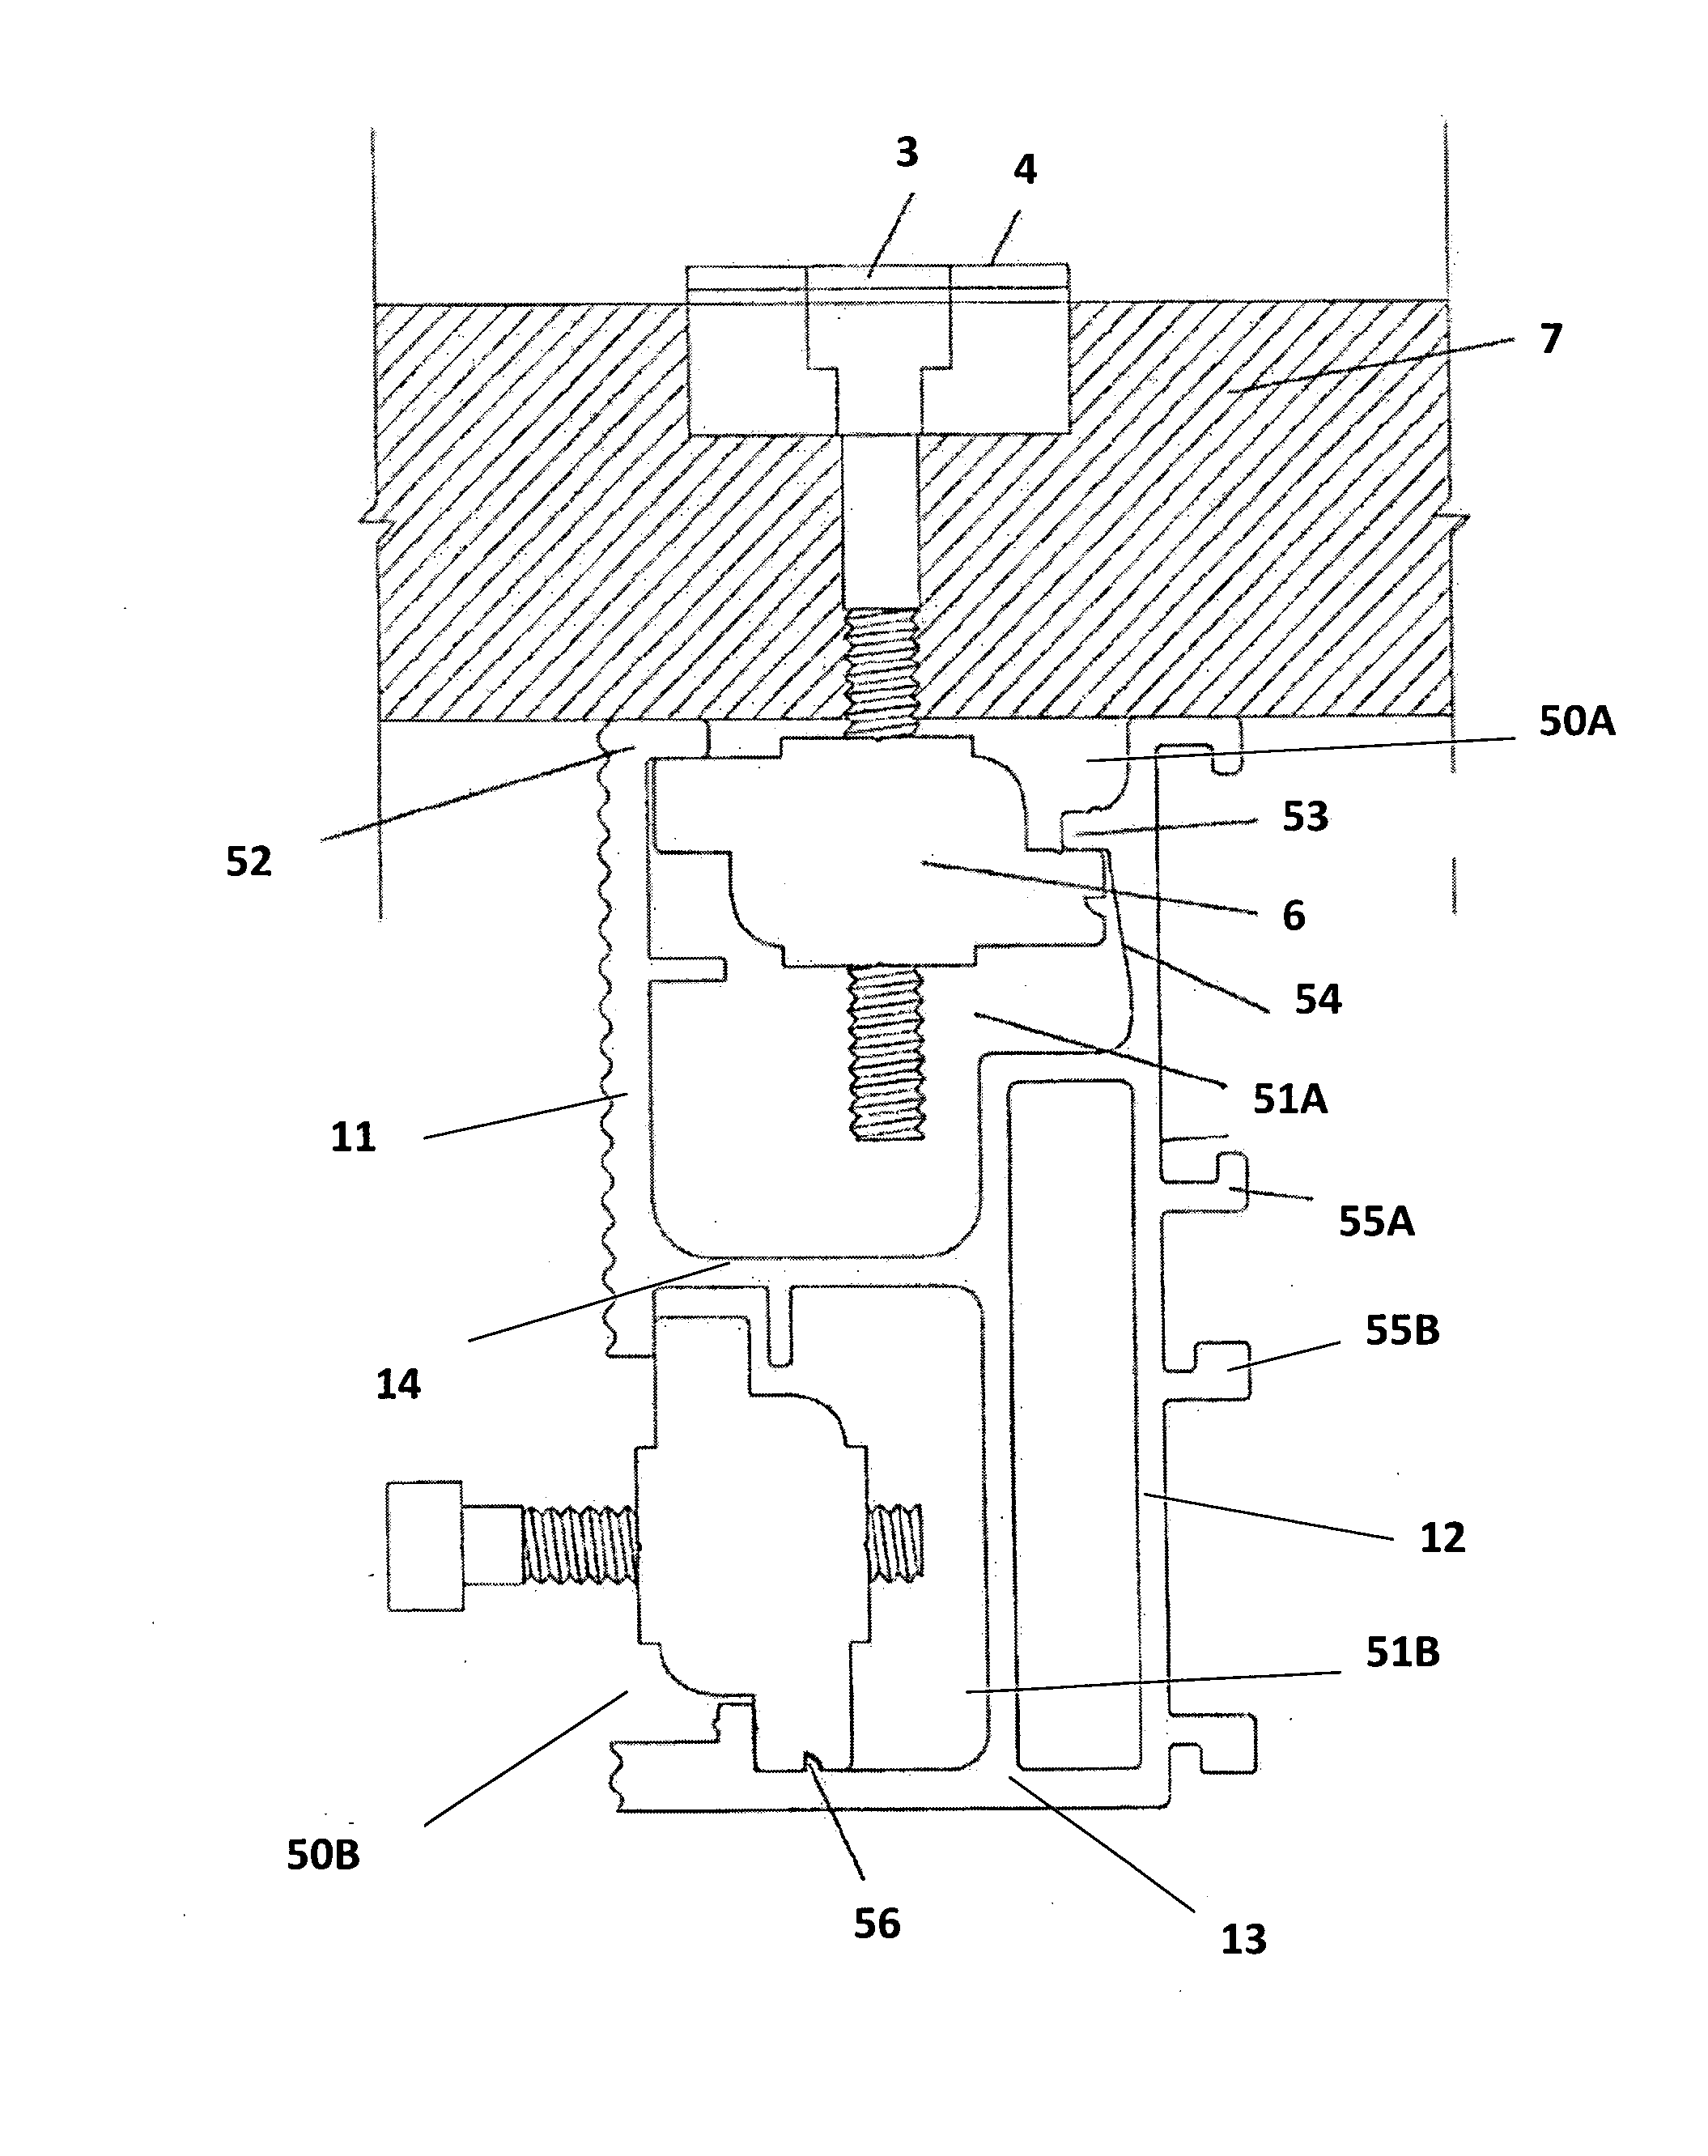 Mounting device